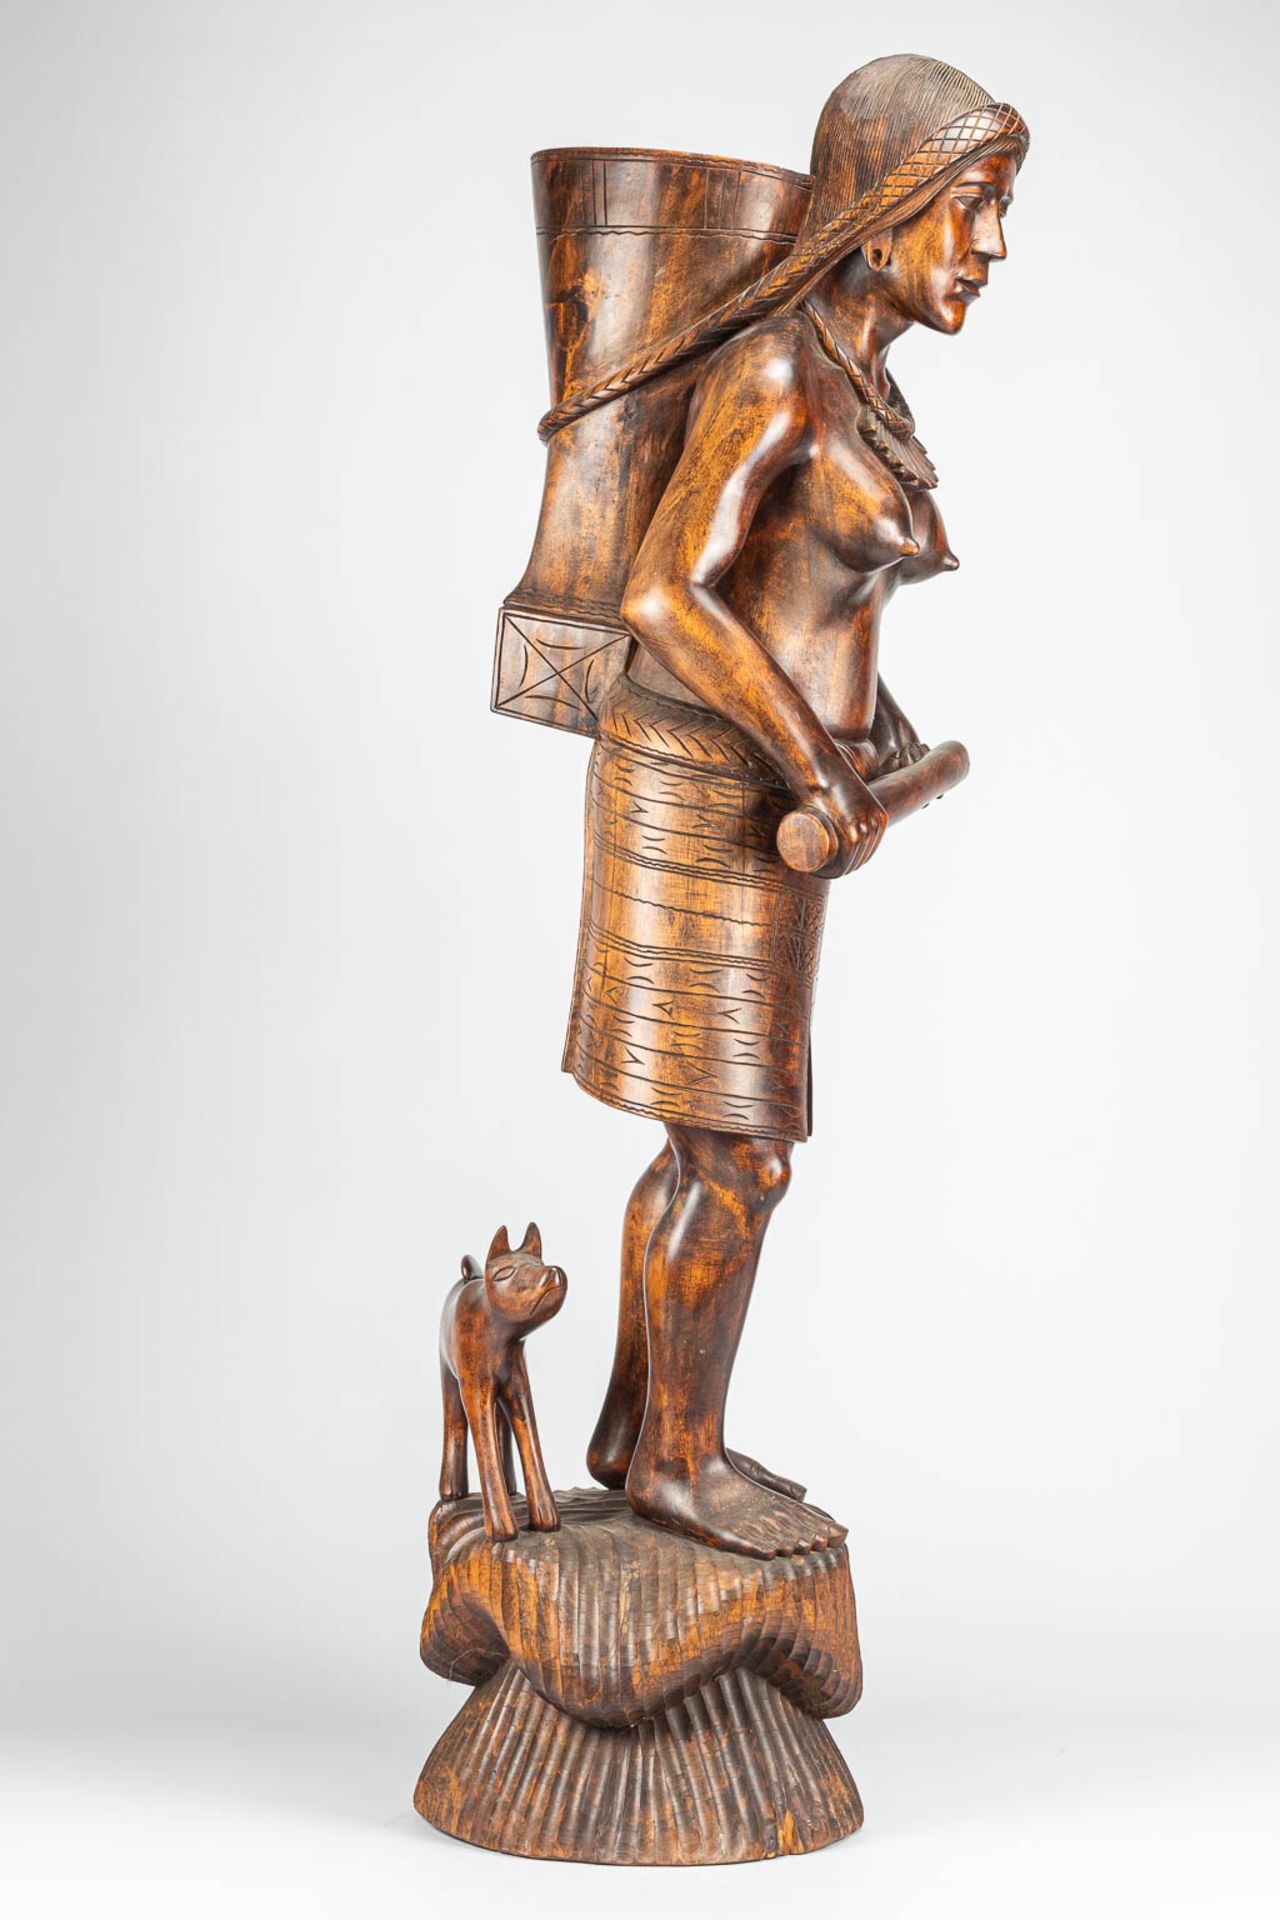 A large statue of an African woman, made of sculptured wood. - Image 4 of 8